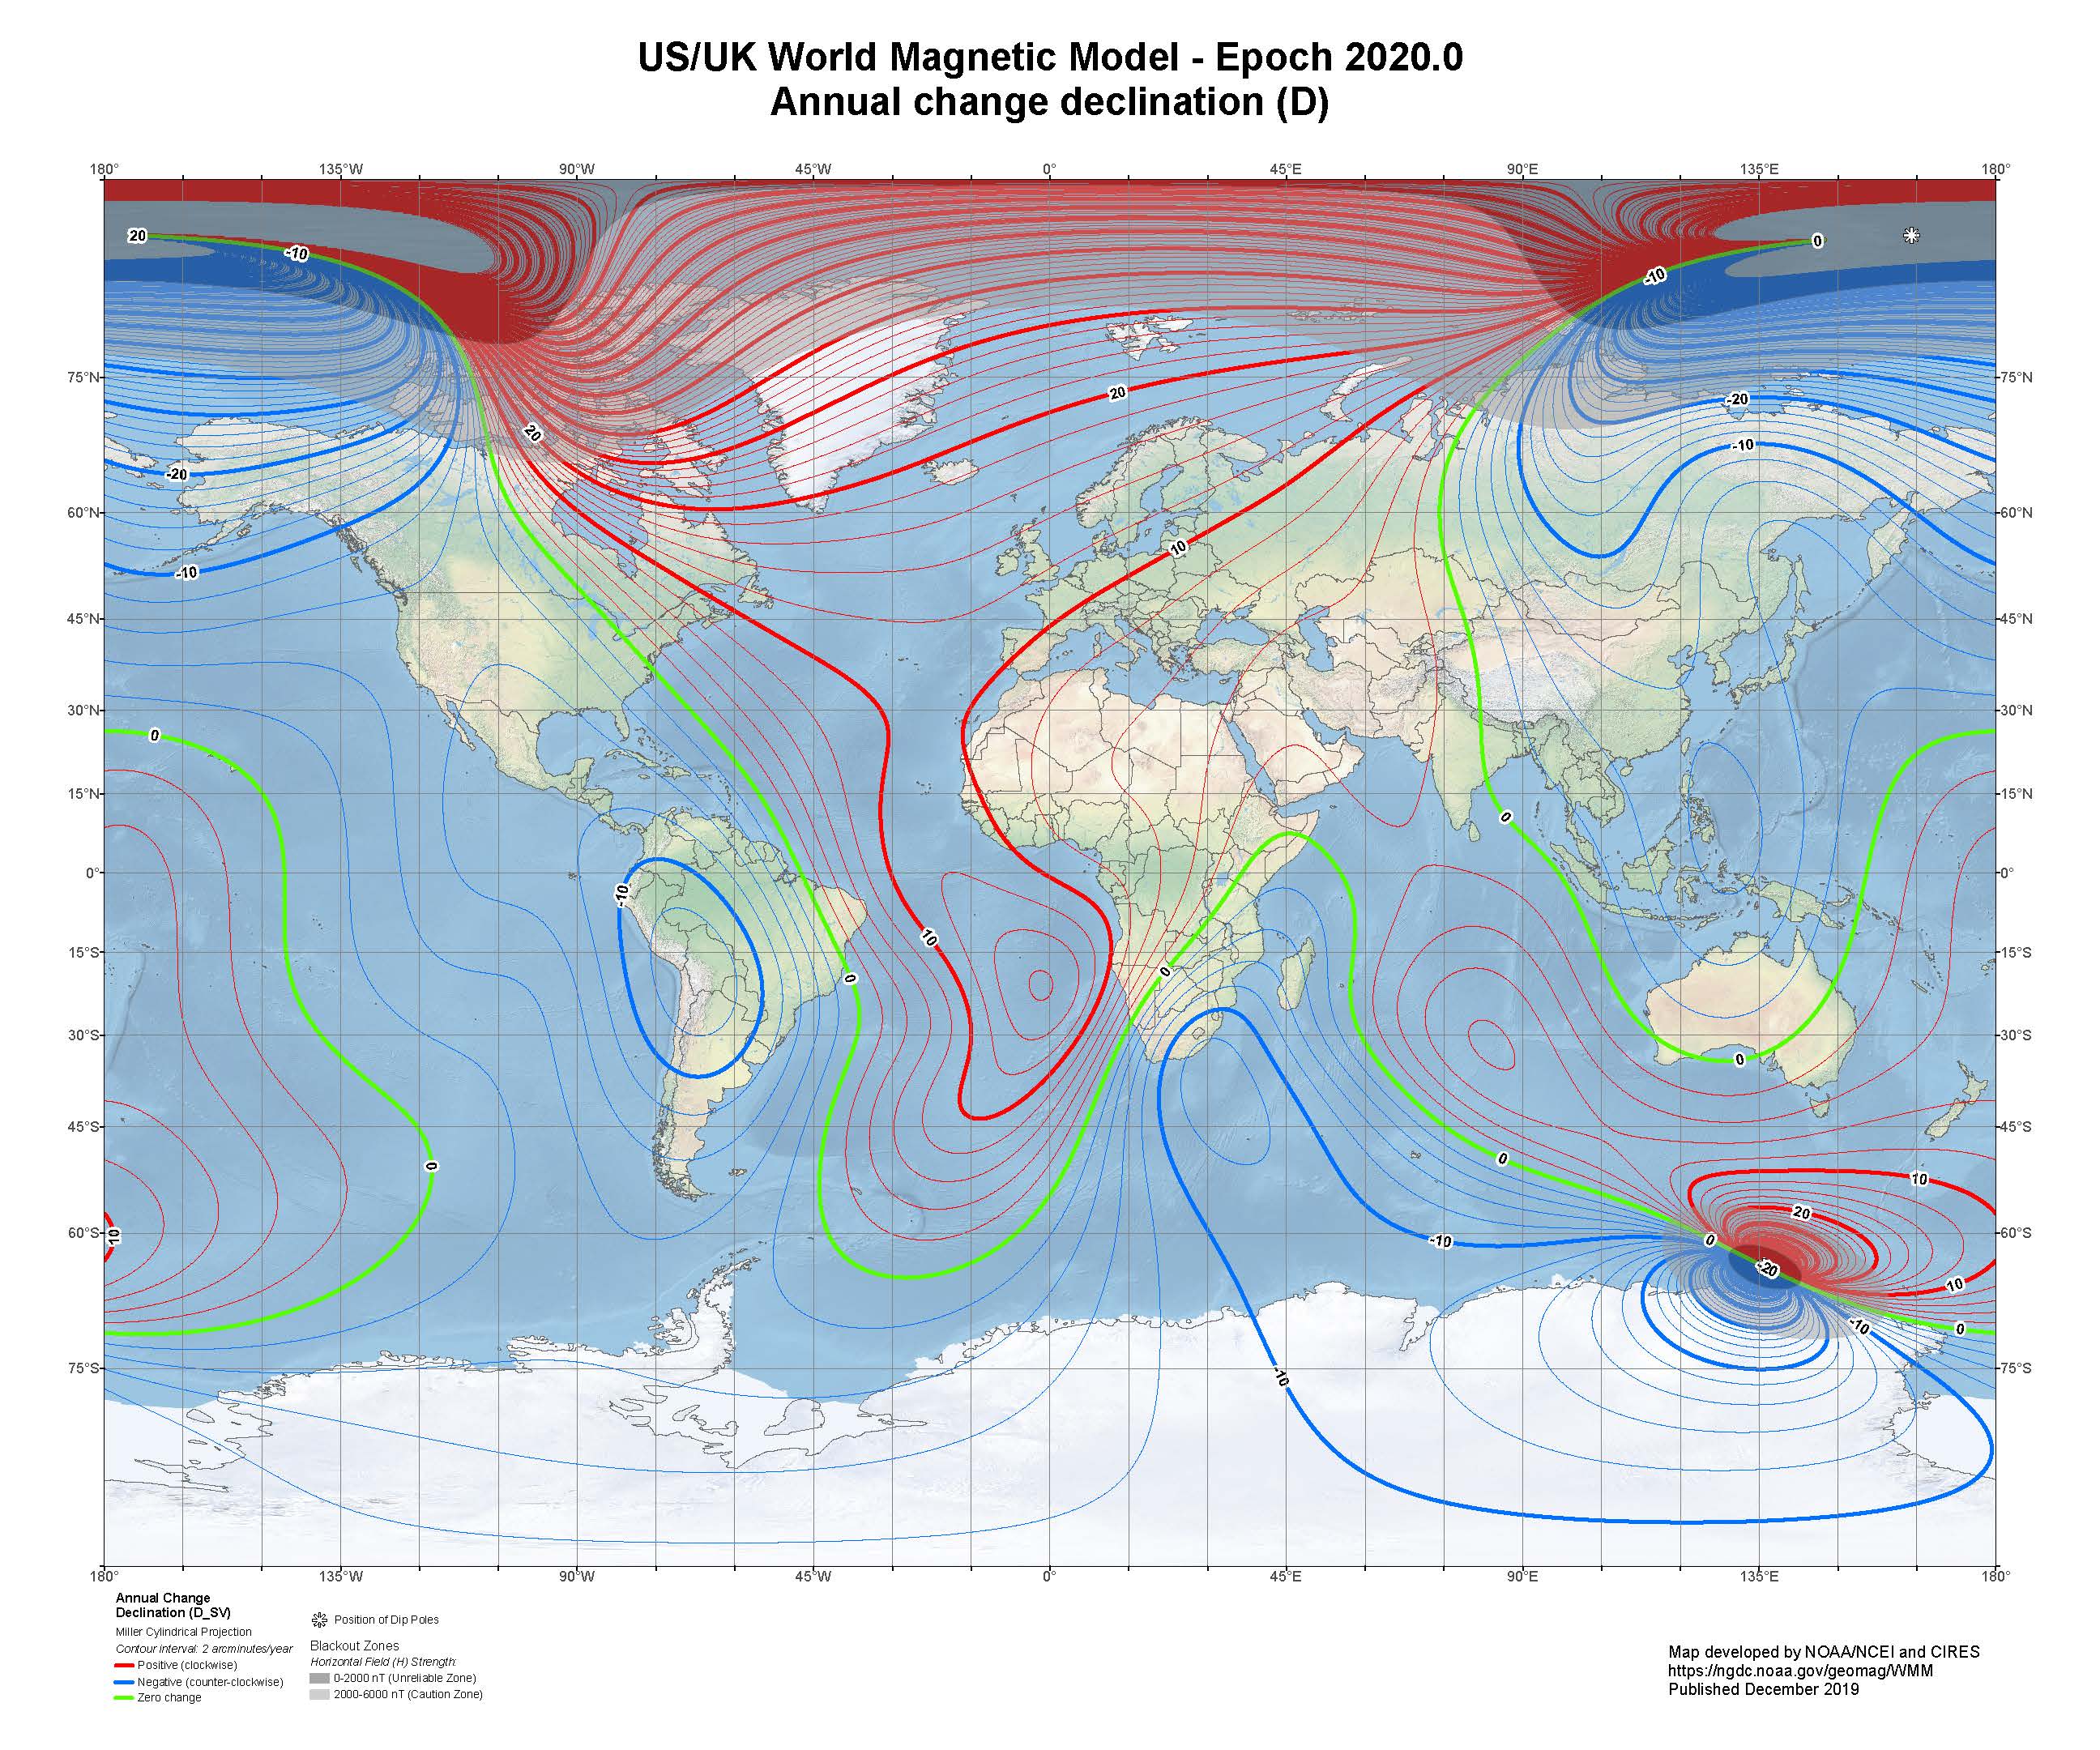 Change in Magnetic Declination at 2020.0 from the World Magnetic Model